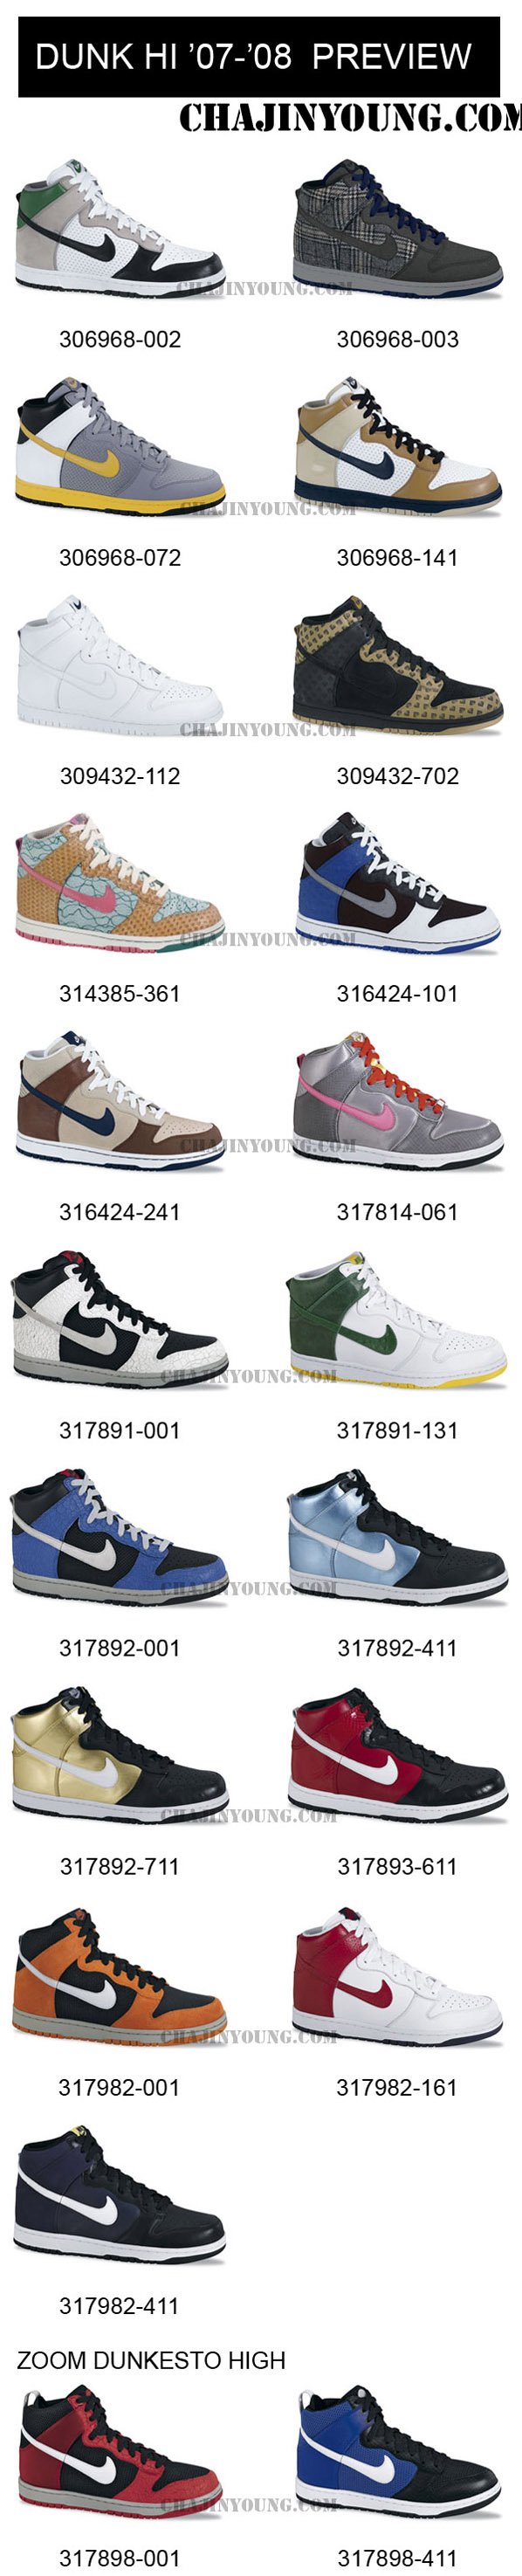 Nike Dunk 2007 - 2008 Preview